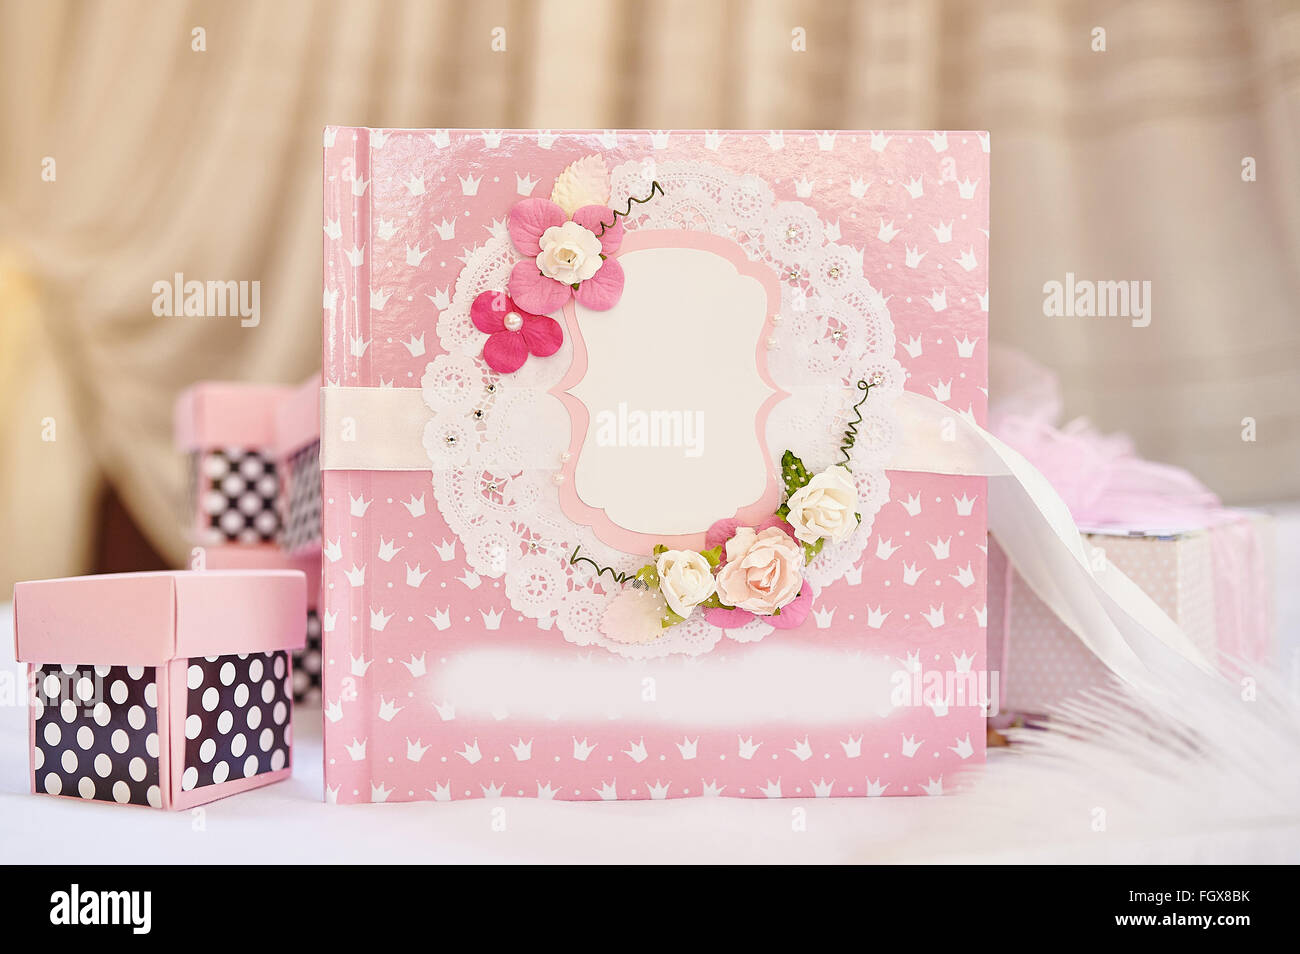 book for the newlyweds congratulation and beautiful wedding gifts for guests Stock Photo